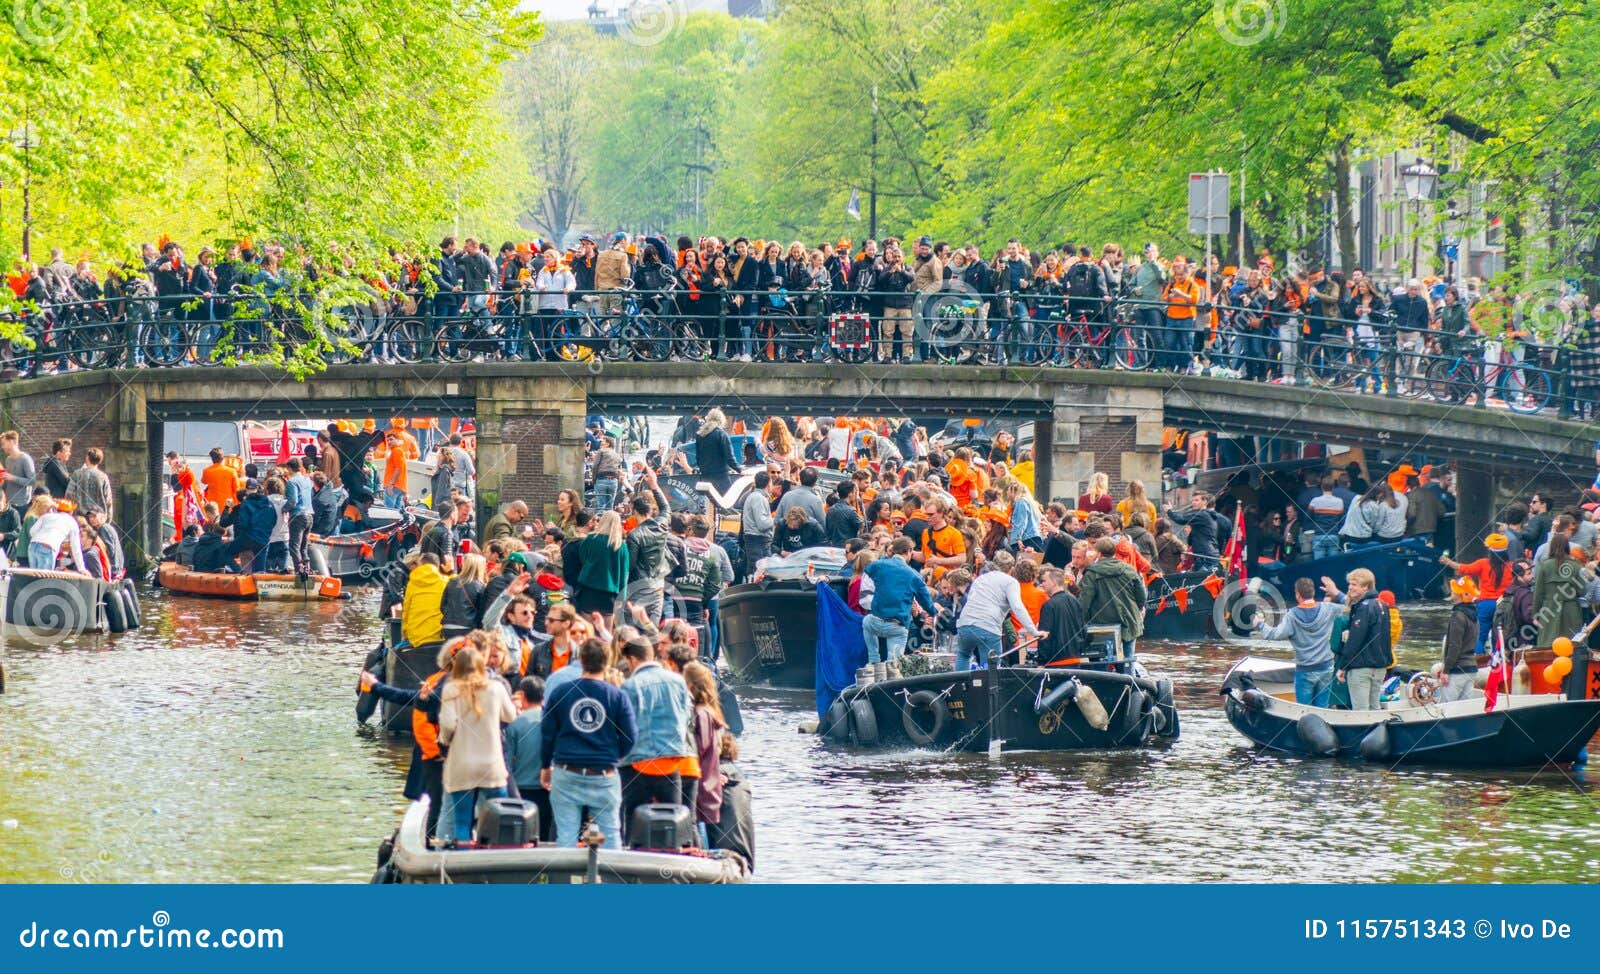 What to do on King's Day 2018?